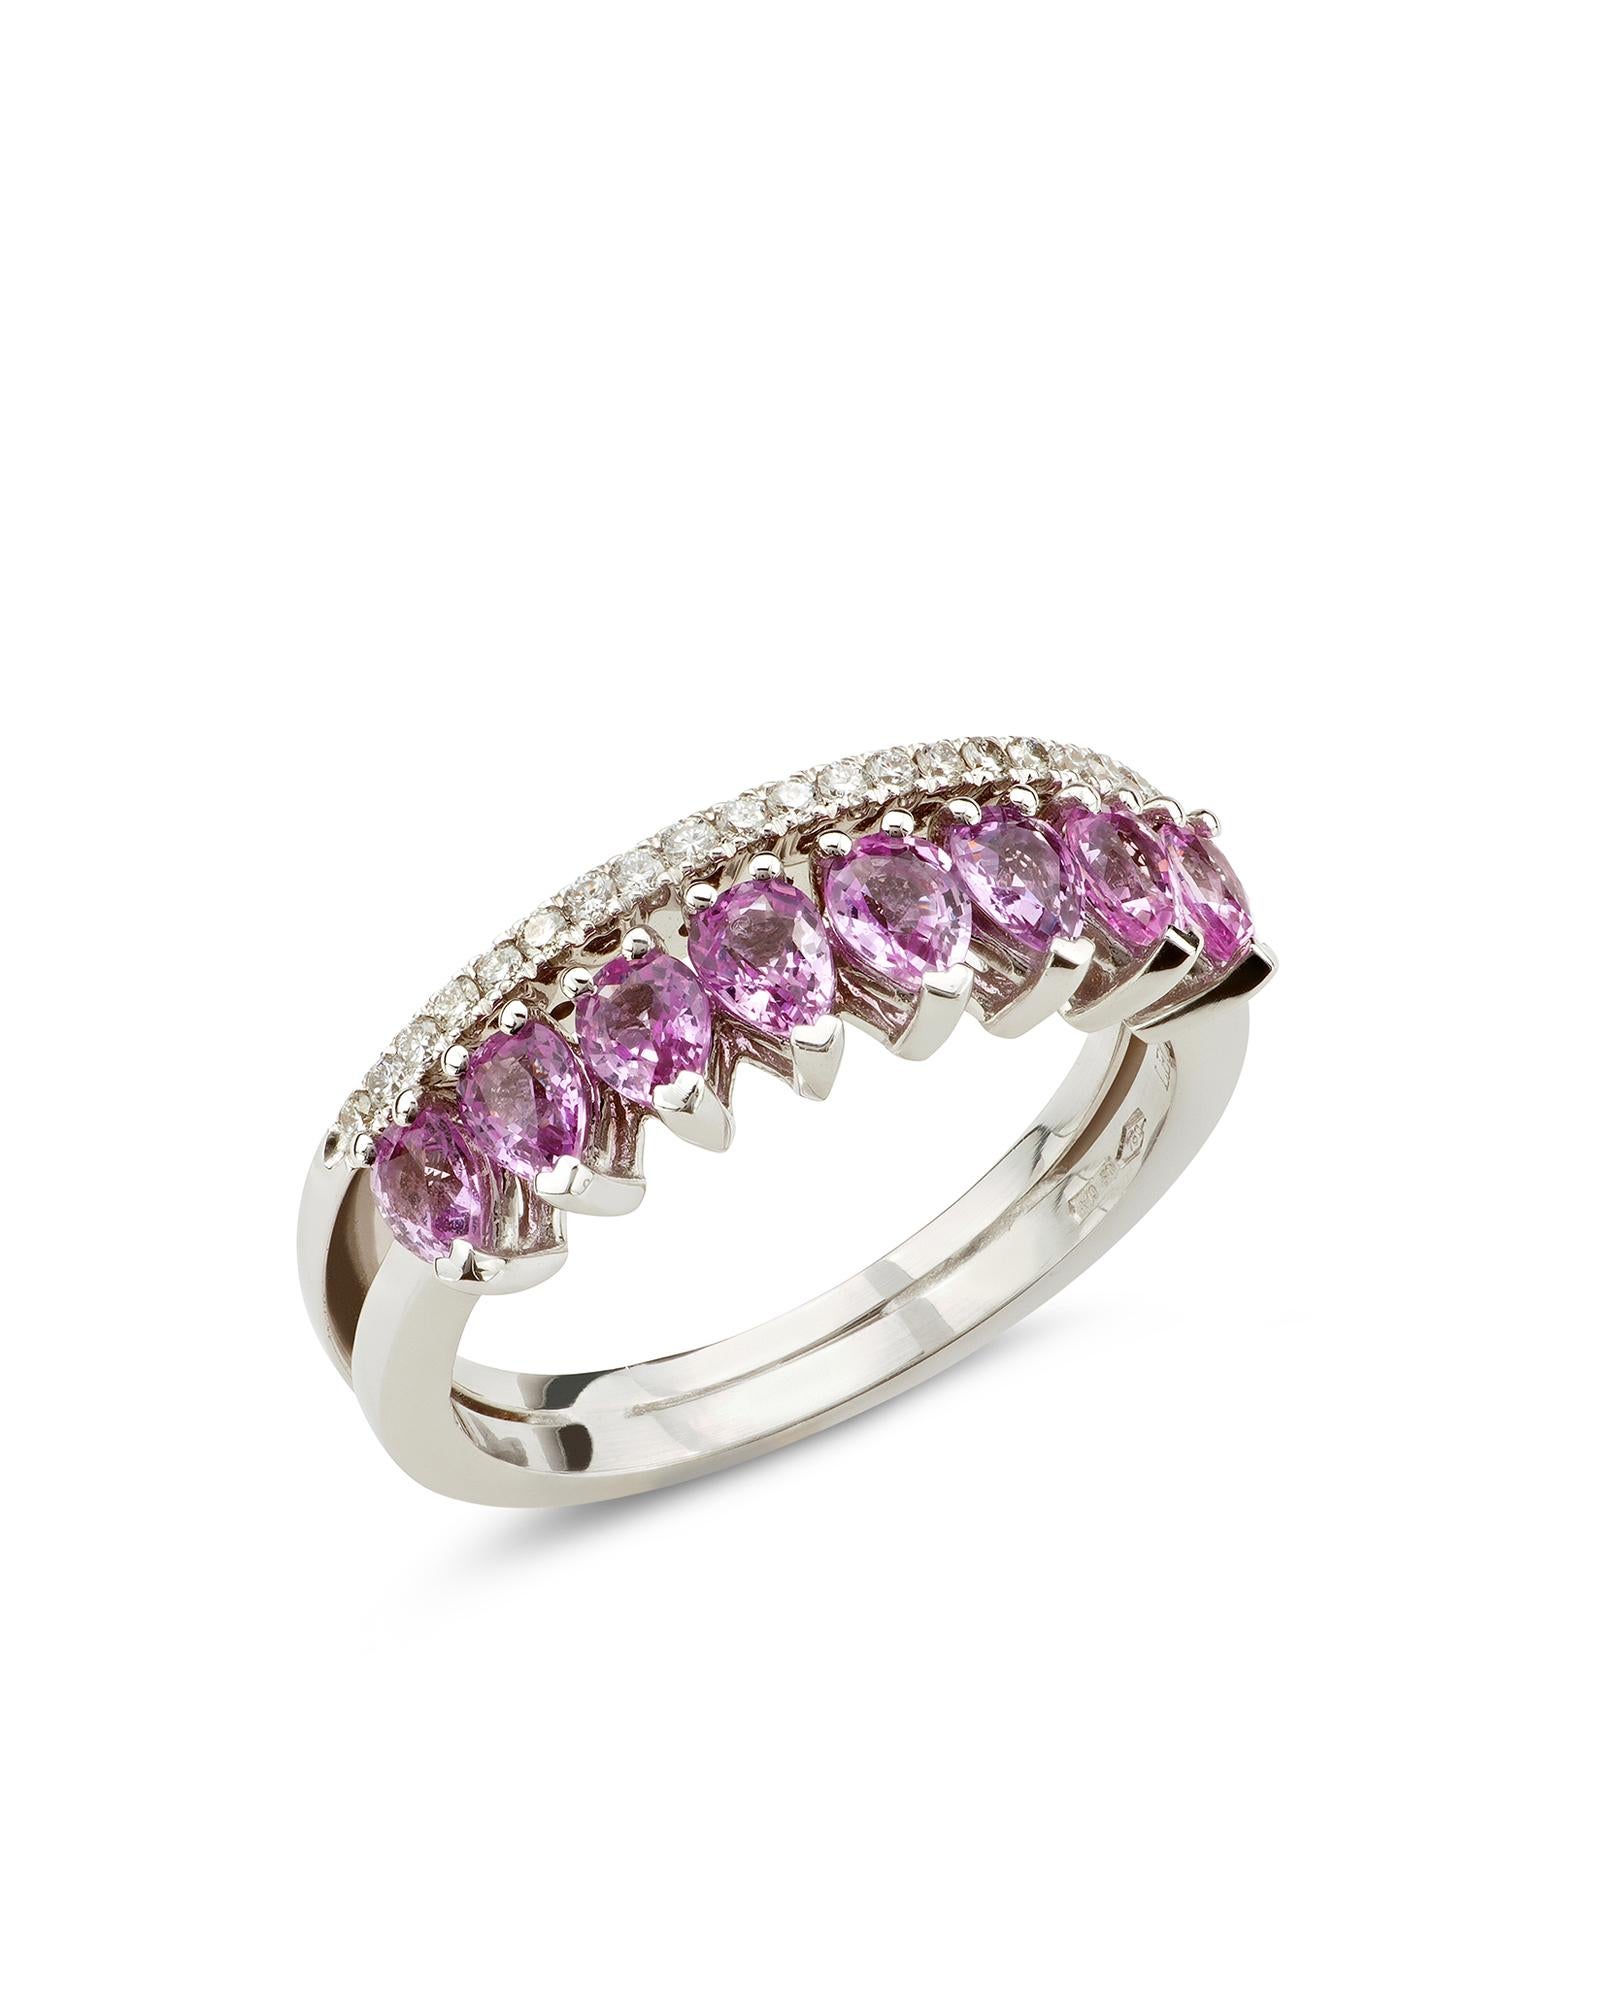 With this ring you can have a unique and particular style. The white gold with pink sapphire and diamonds let this ring shine even more.
This ring could be combine with the other rings from the same line with different color

Characteristics:
• 18